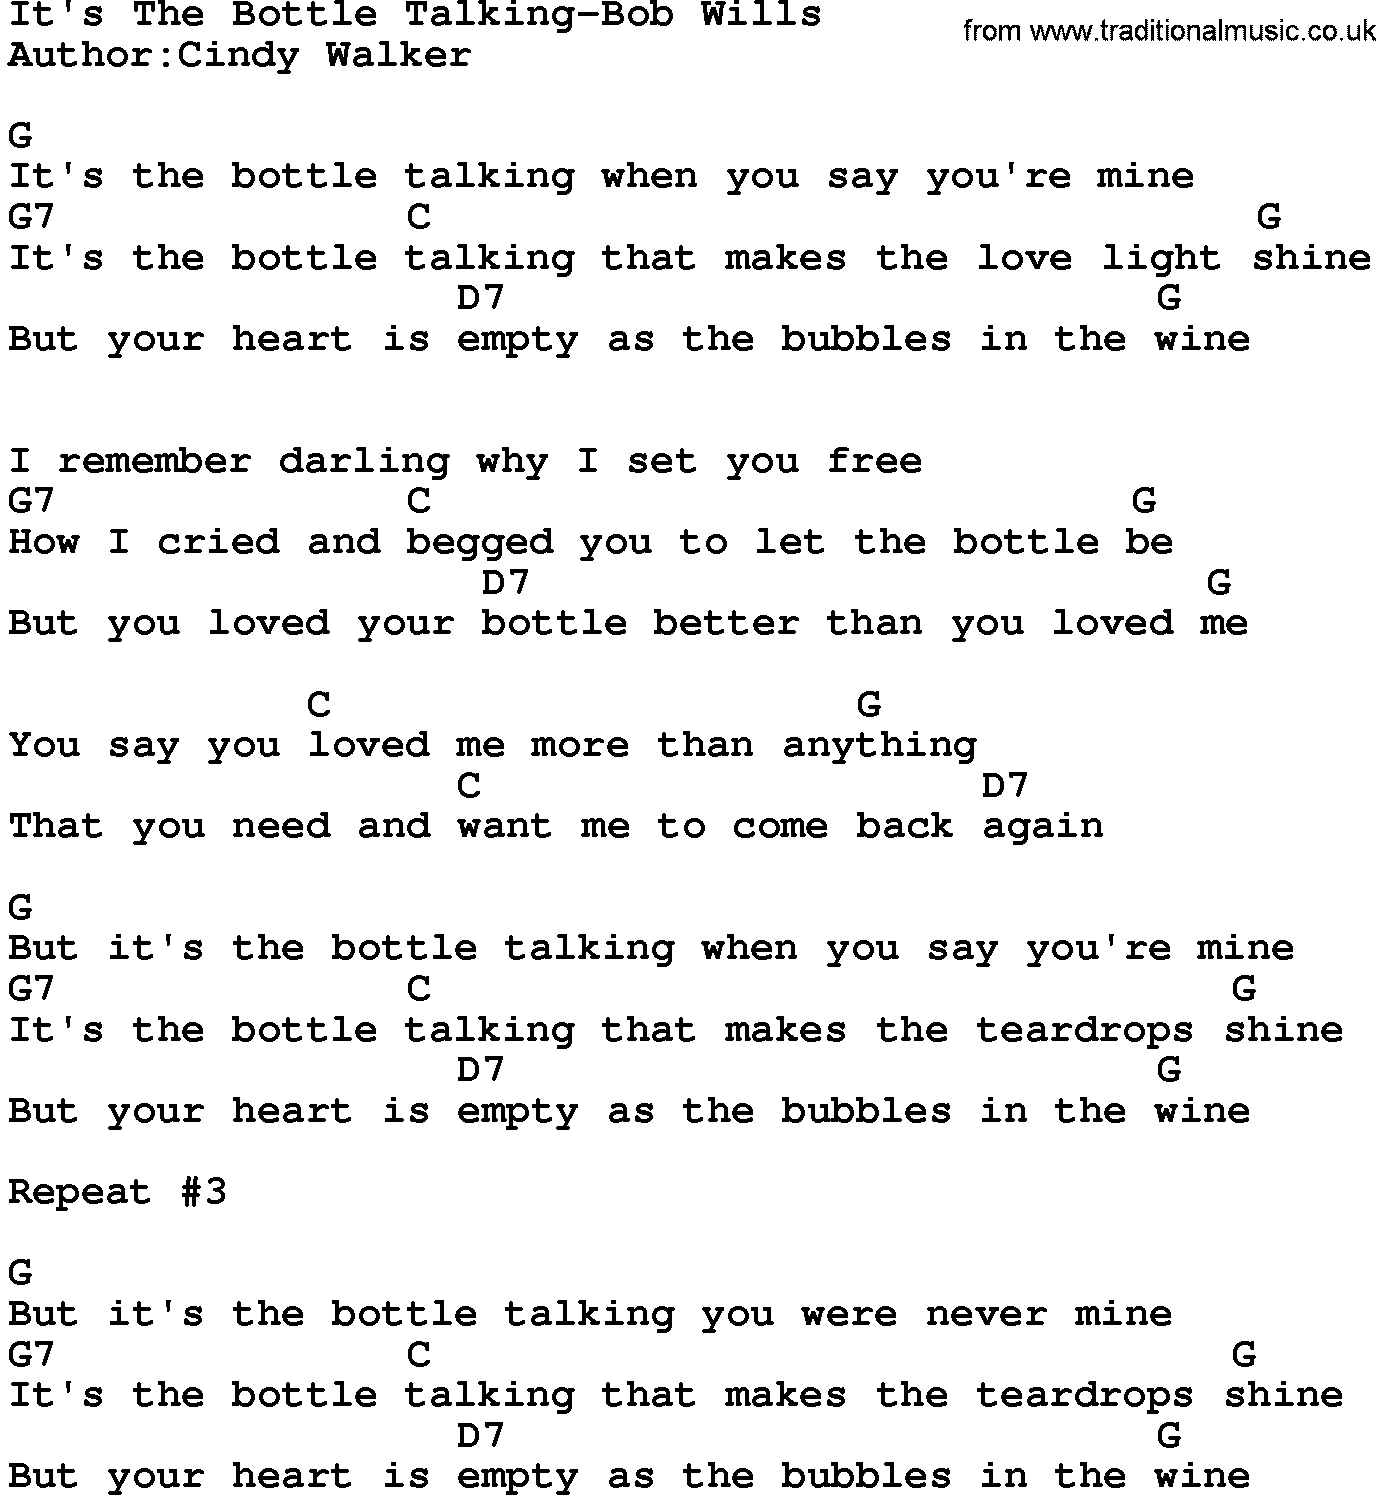 Country music song: It's The Bottle Talking-Bob Wills lyrics and chords